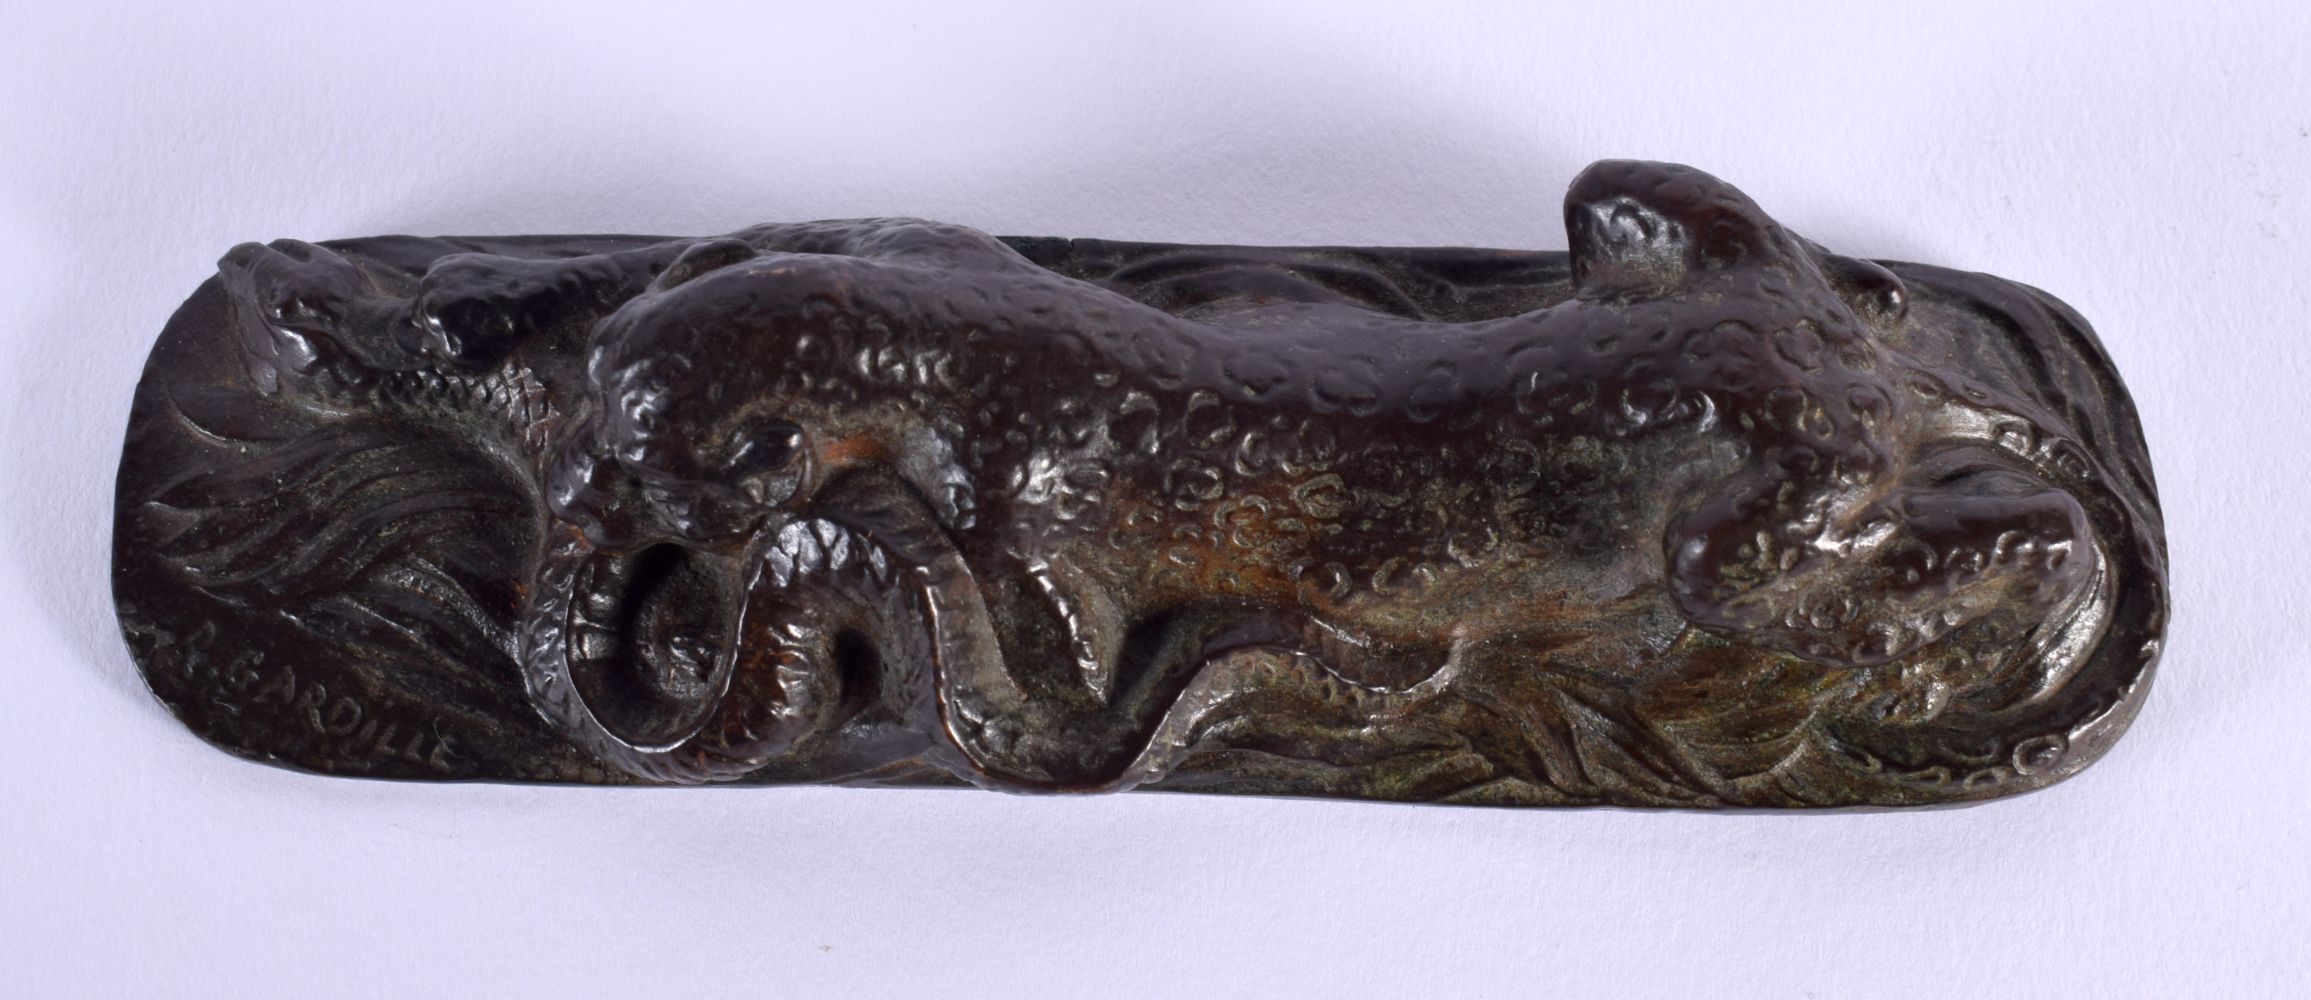 R Gardille (C1920) Bronze, Cheetah with snake. 12 cm wide. - Image 3 of 4